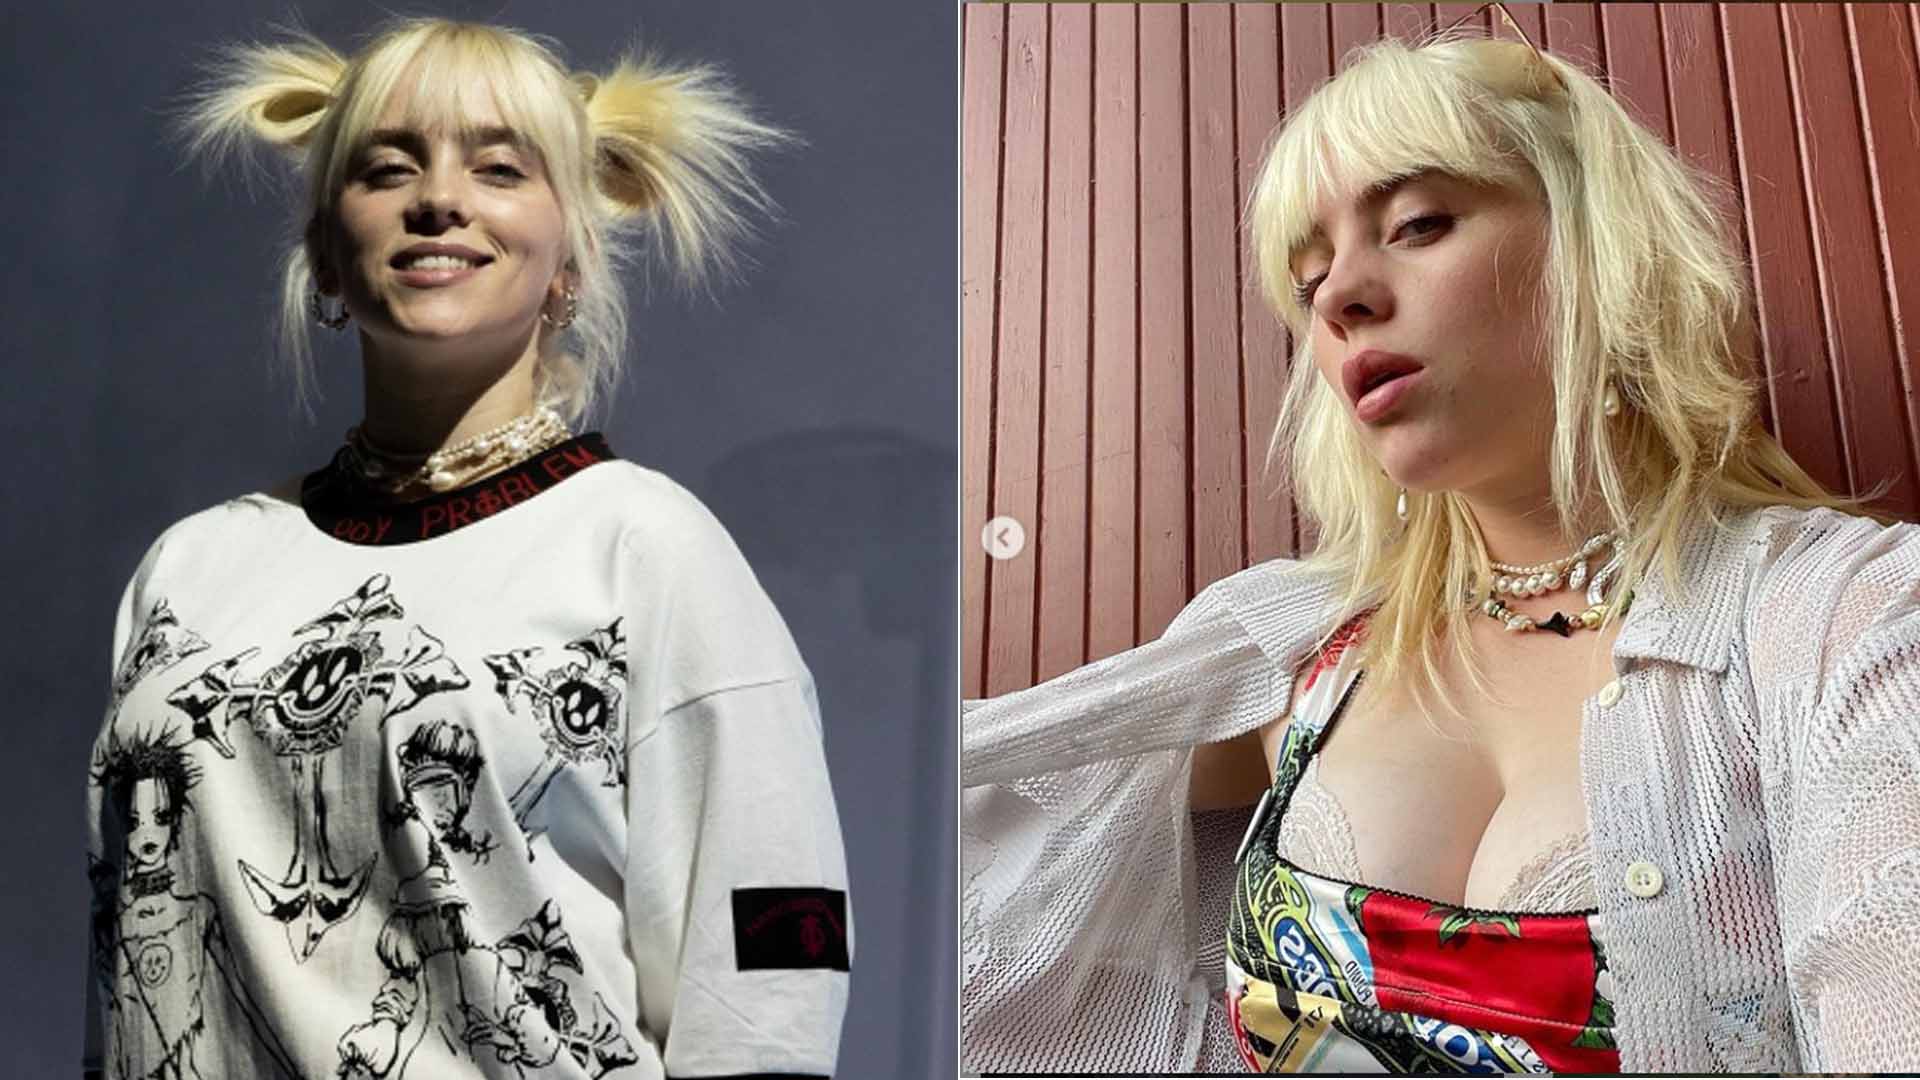 azza essam recommends does billie eilish have big tits pic